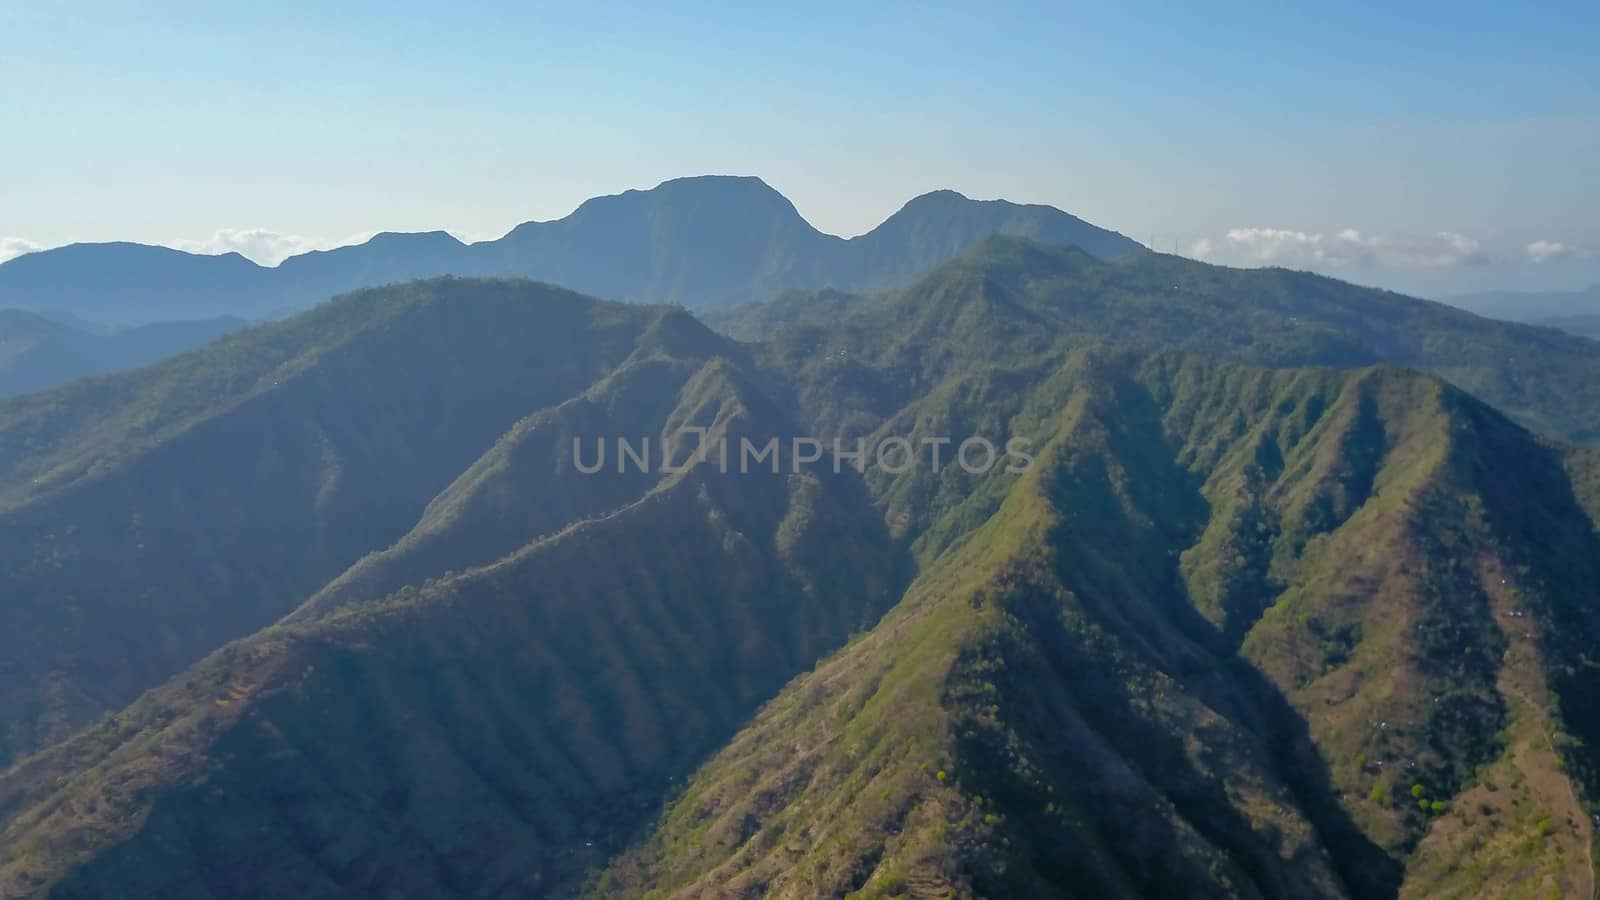 Mountainous landscape of Amed village. Aerial view of the mountains above the village, Bali, Indonesia. Lempuyang and Seraya mountains. Breathtaking panoramic view of the mountains in the tropics by Sanatana2008